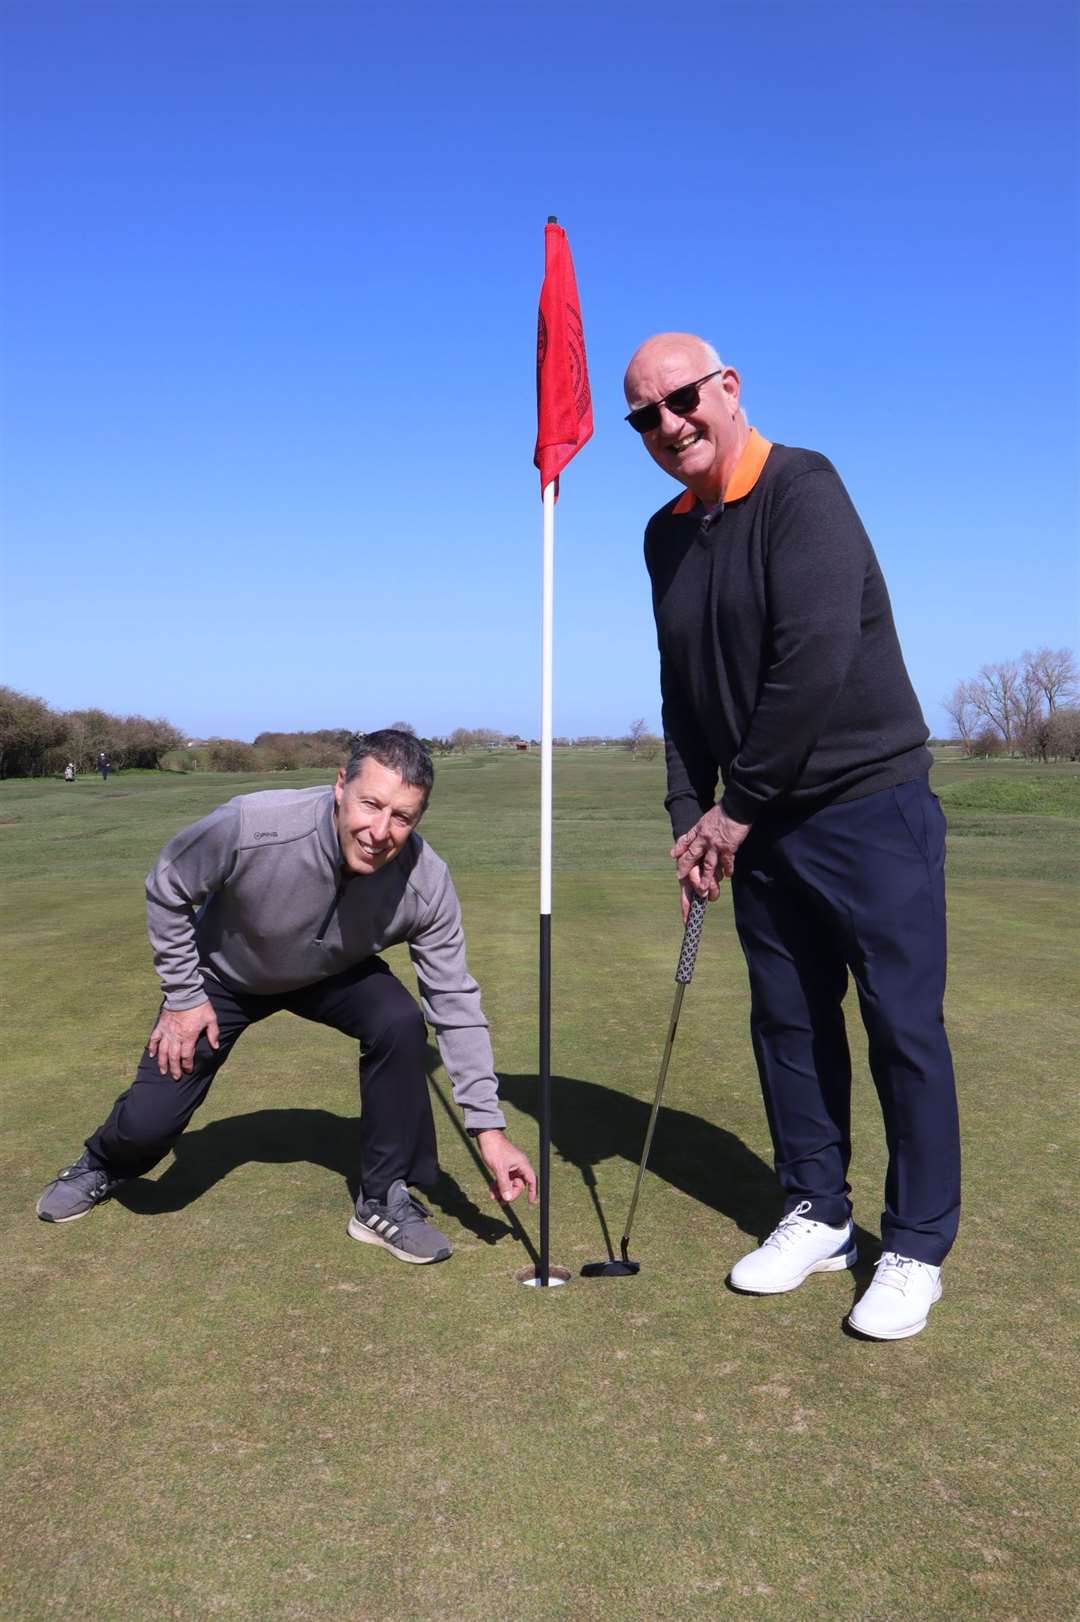 Paul Onslow, left, and Ray Seager were among the first to return to the greens at Sheerness Golf Club on Monday after Covid-19 lockdown restrictions were eased